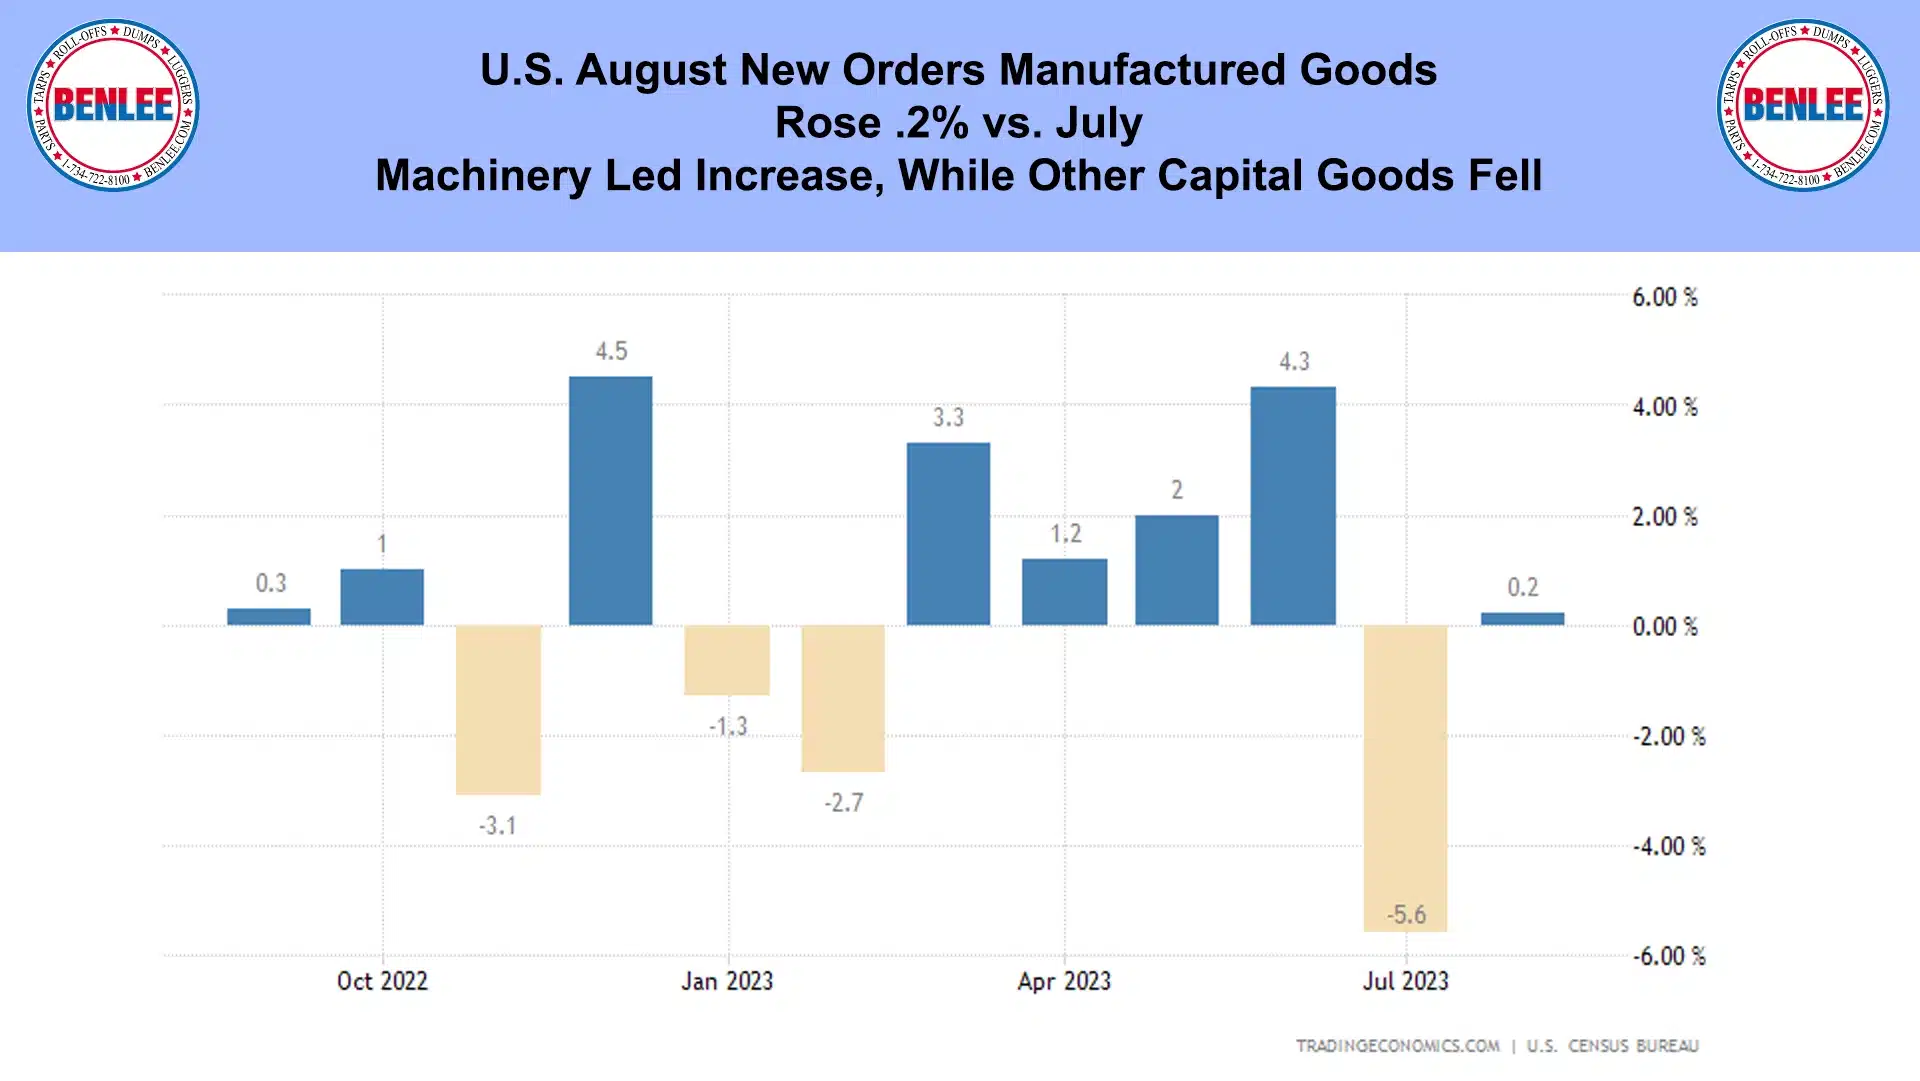 U.S. August New Orders Manufactured Goods